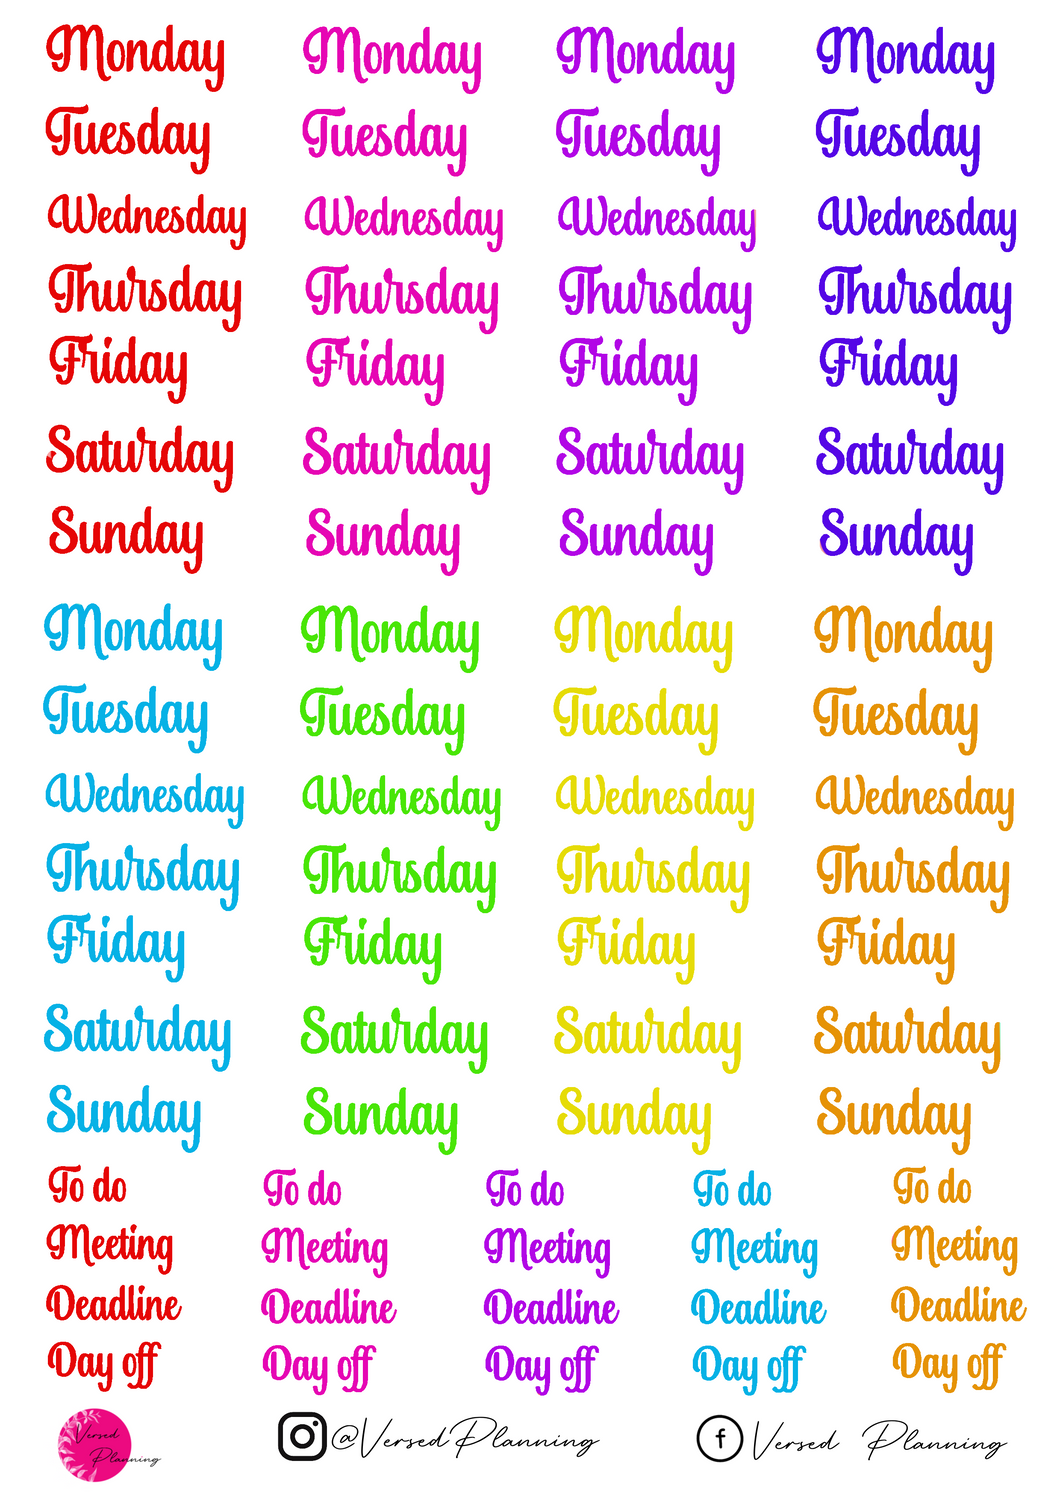 SCRIPT DAY HEADERS, 15 COLOR OPTIONS TO SELECT FROM